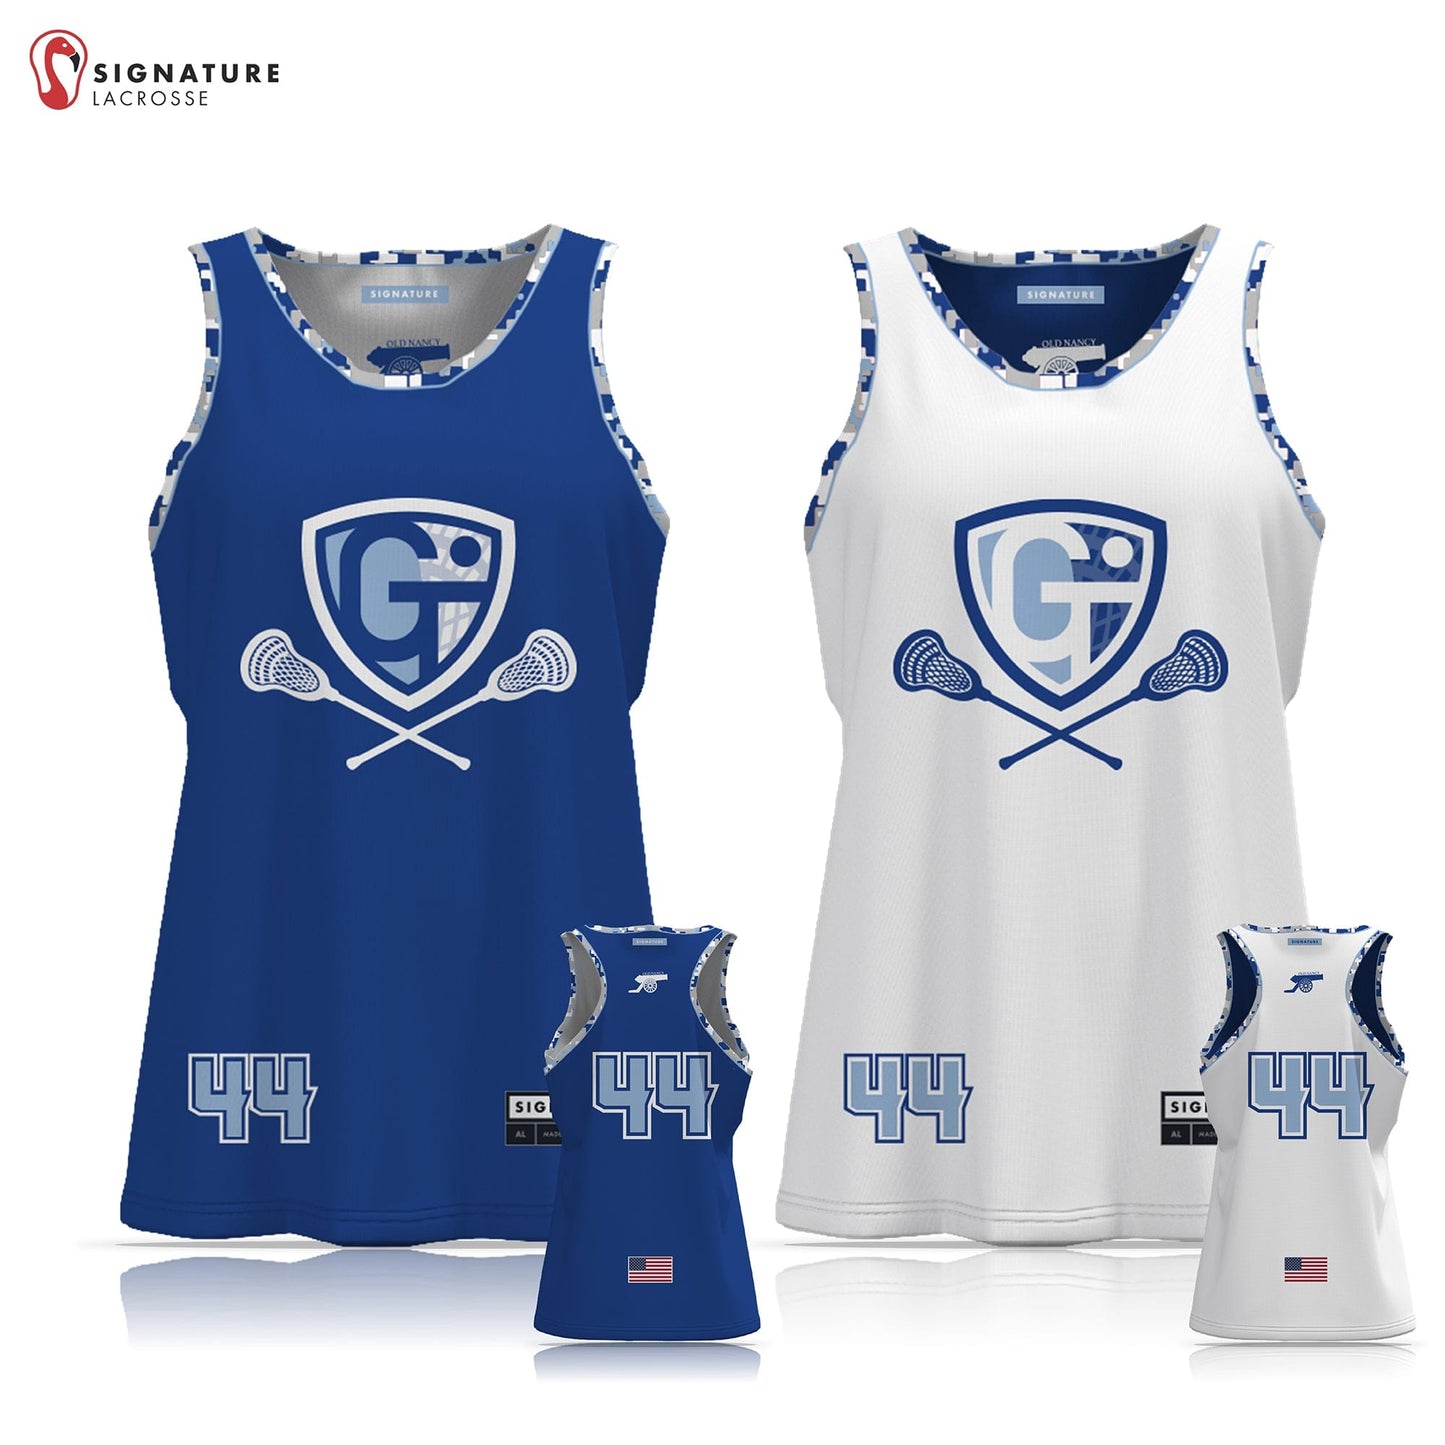 Georgetown-Triton Youth Lacrosse Women's Player Reversible Game Pinnie: 7-8 Signature Lacrosse